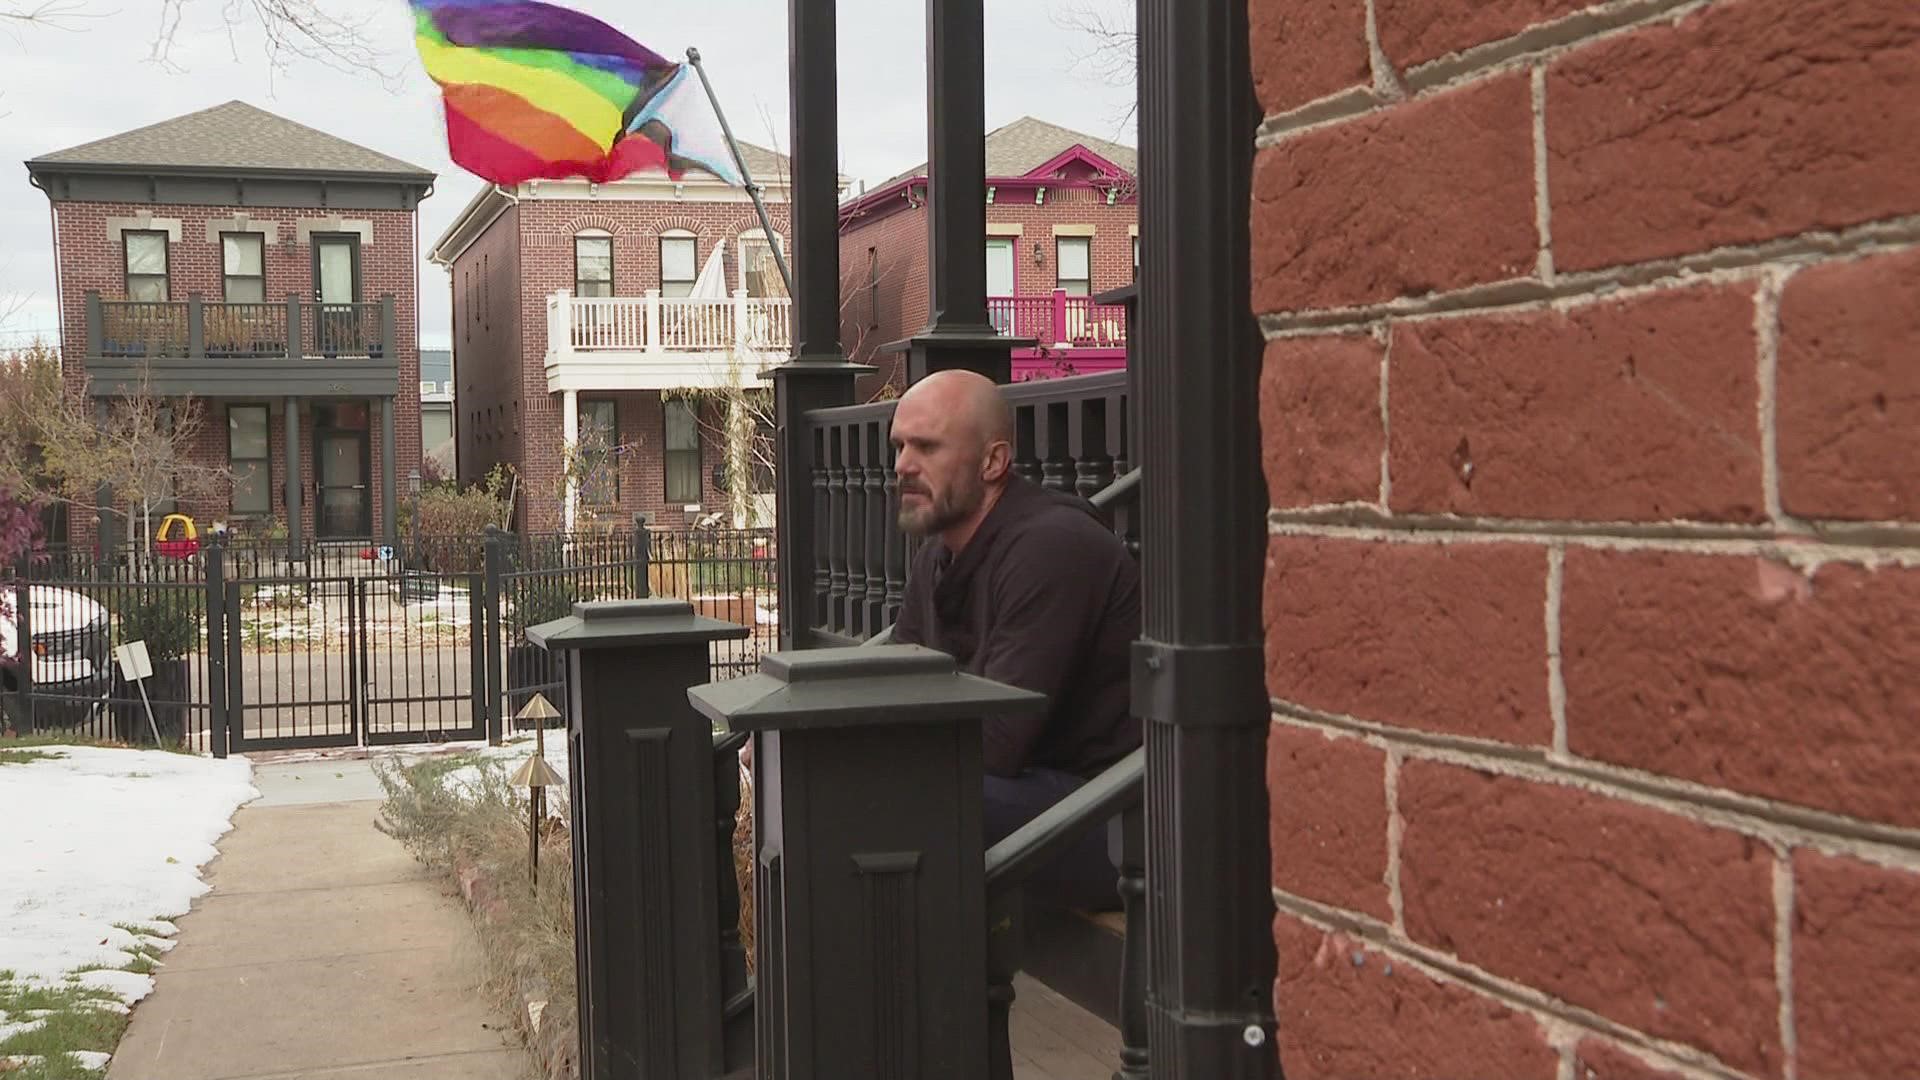 These neighbors in Denver's Curtis Park neighborhood are honoring victims in the Club Q shooting by hanging Pride flags.